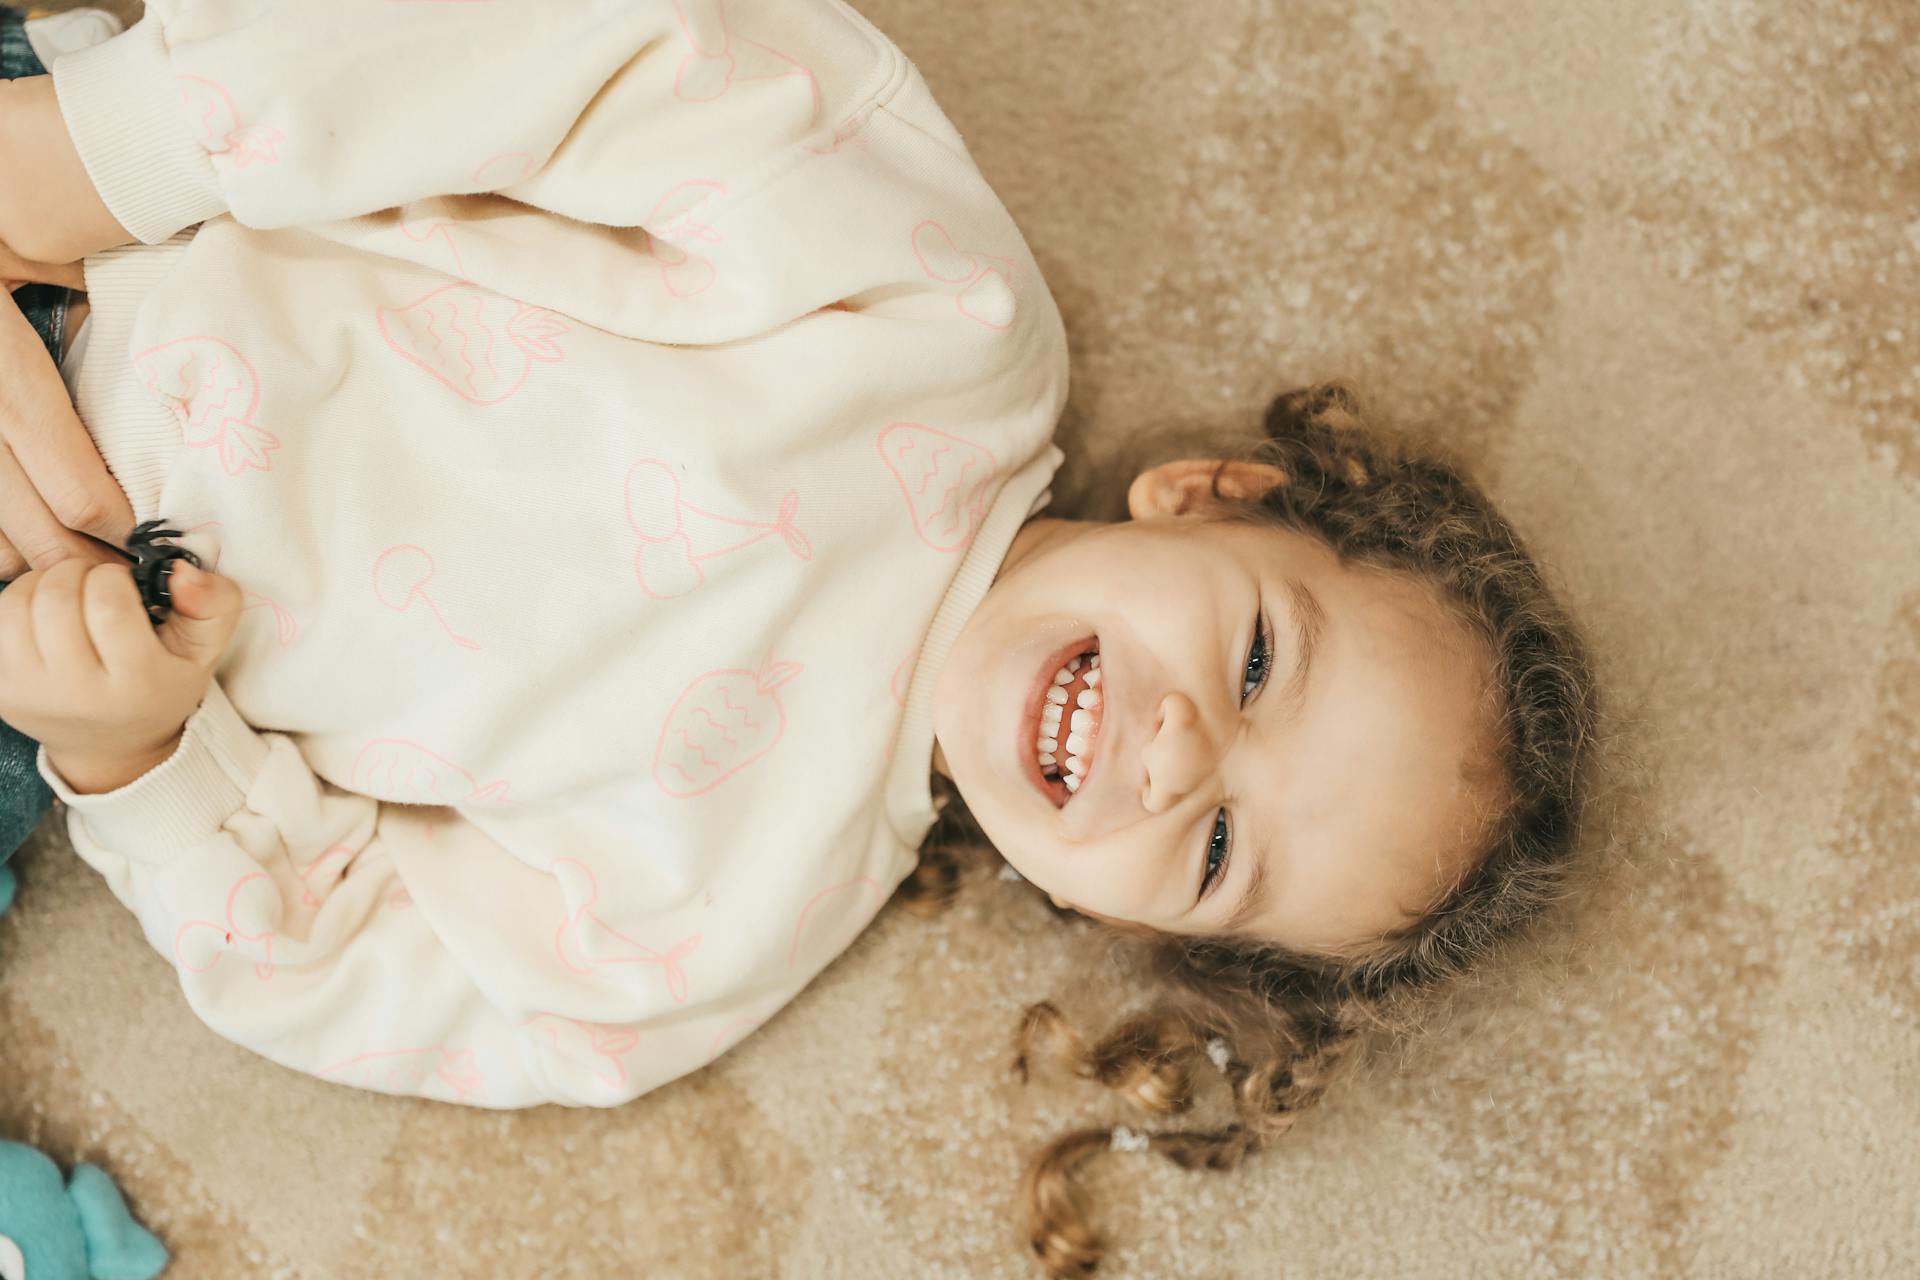 A smiling child lying on the floor | Source: Pexels